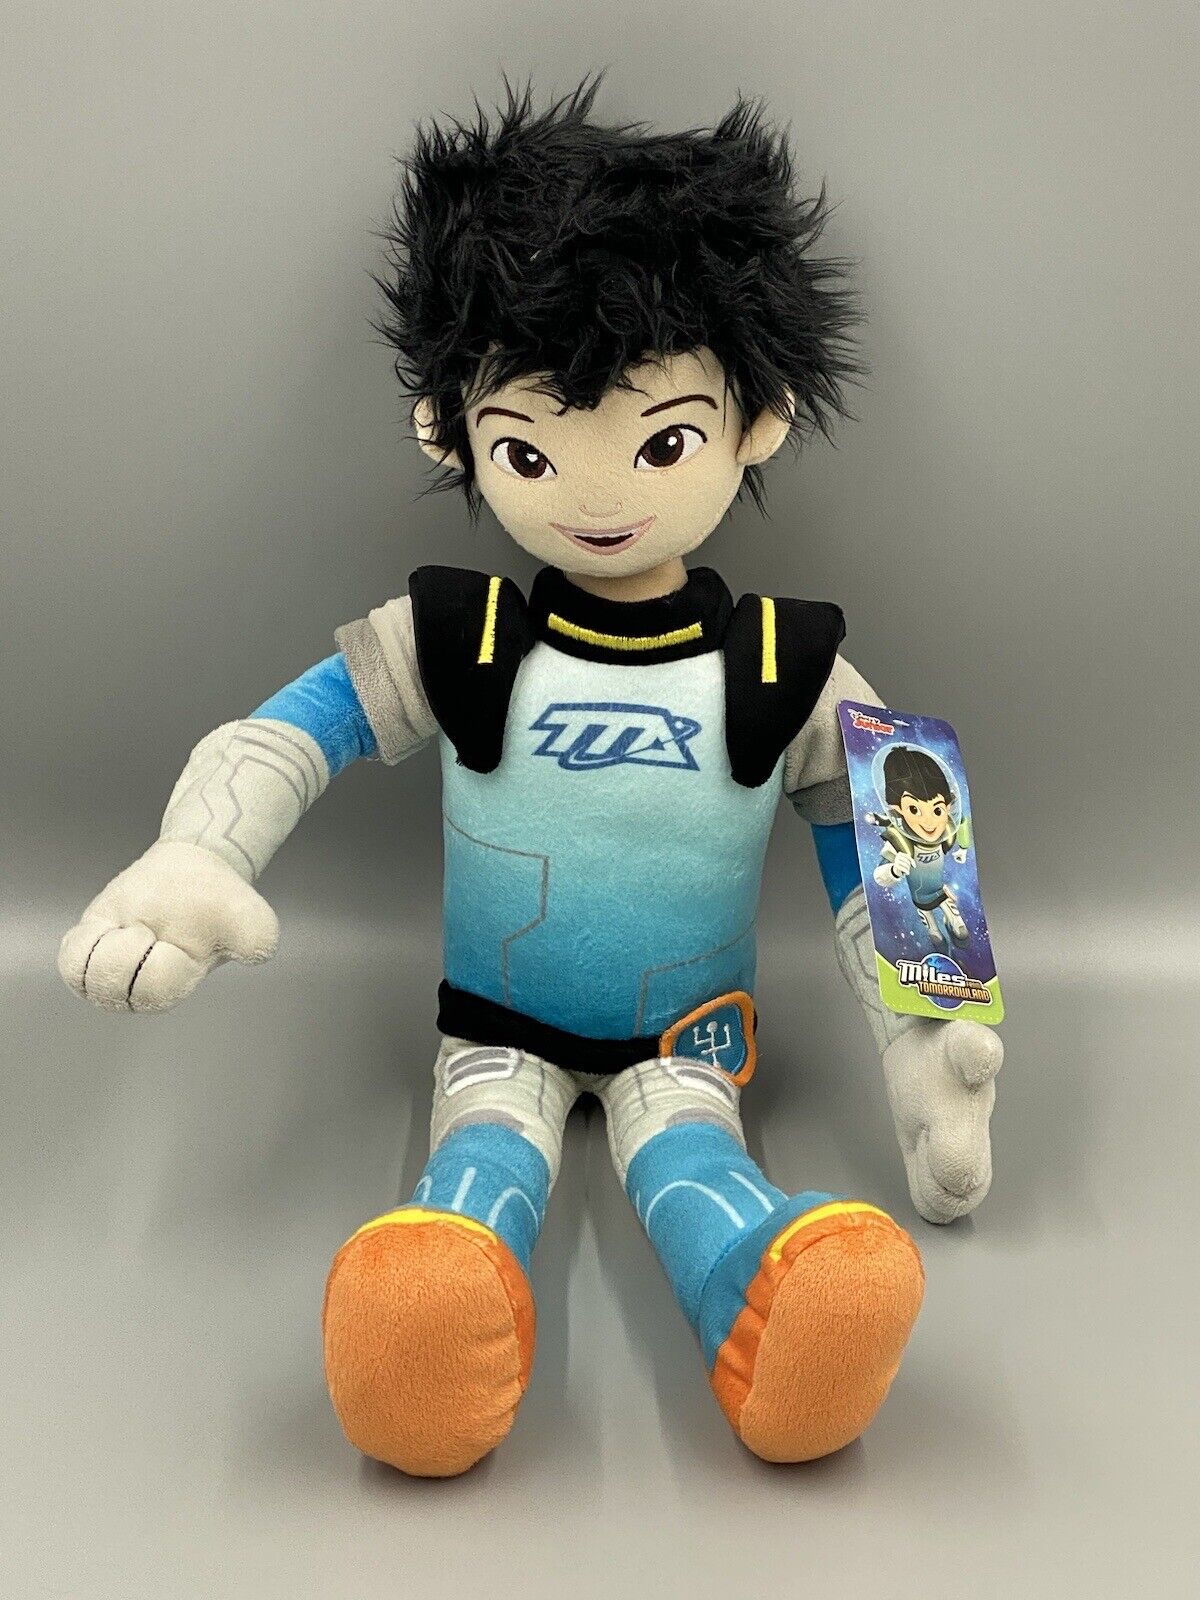 Disney Large 25” Miles From Tomorrowland Plush Miles Stuffed Doll Pillow Toy